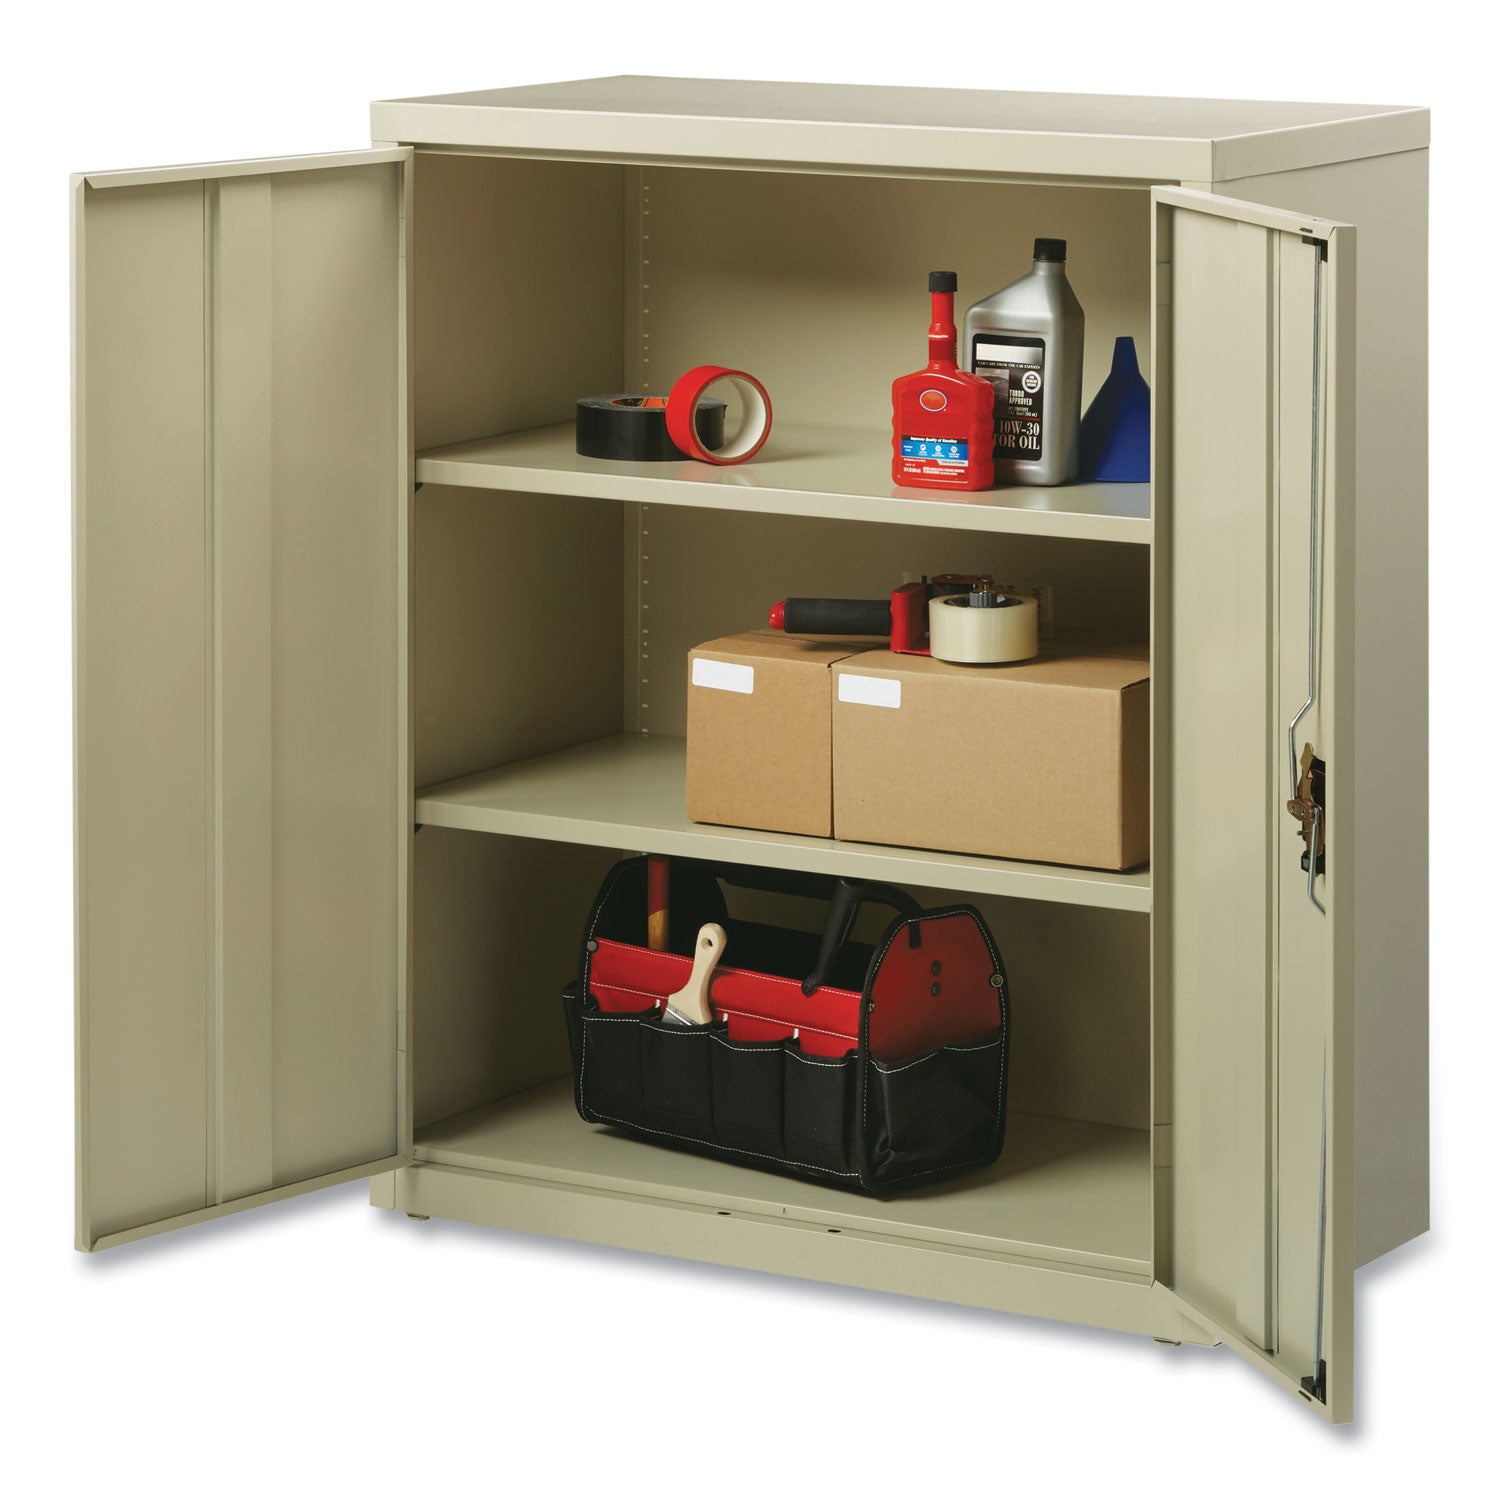 fully-assembled-storage-cabinets-3-shelves-36-x-18-x-42-putty_oifcm4218py - 1